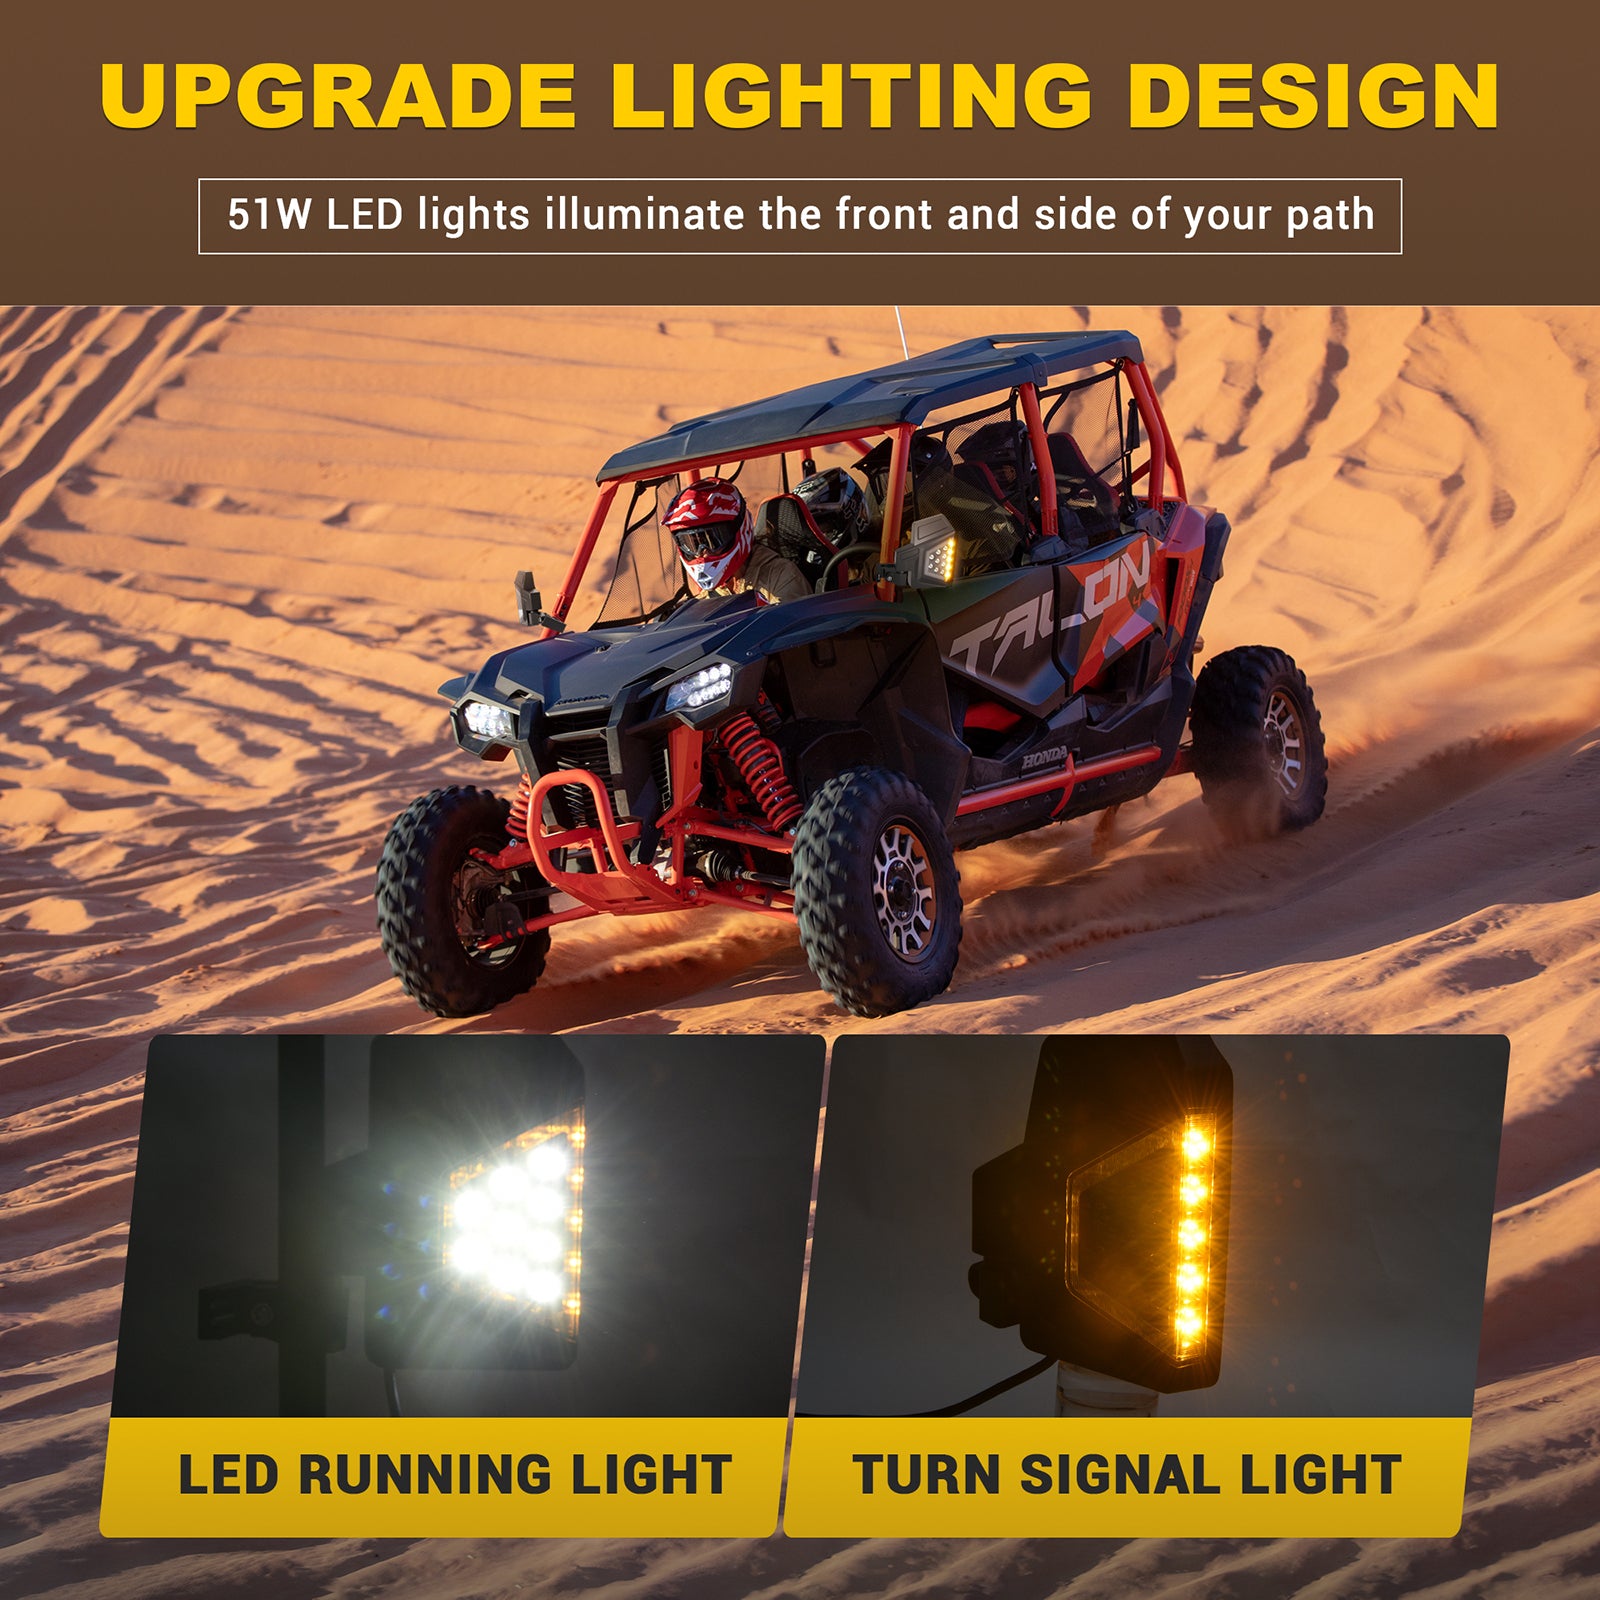 UTV RZR Side Rear View Mirrors w/ LED Lights 51W, Fit All 1.5 -1.75 Roll  Bar Cage